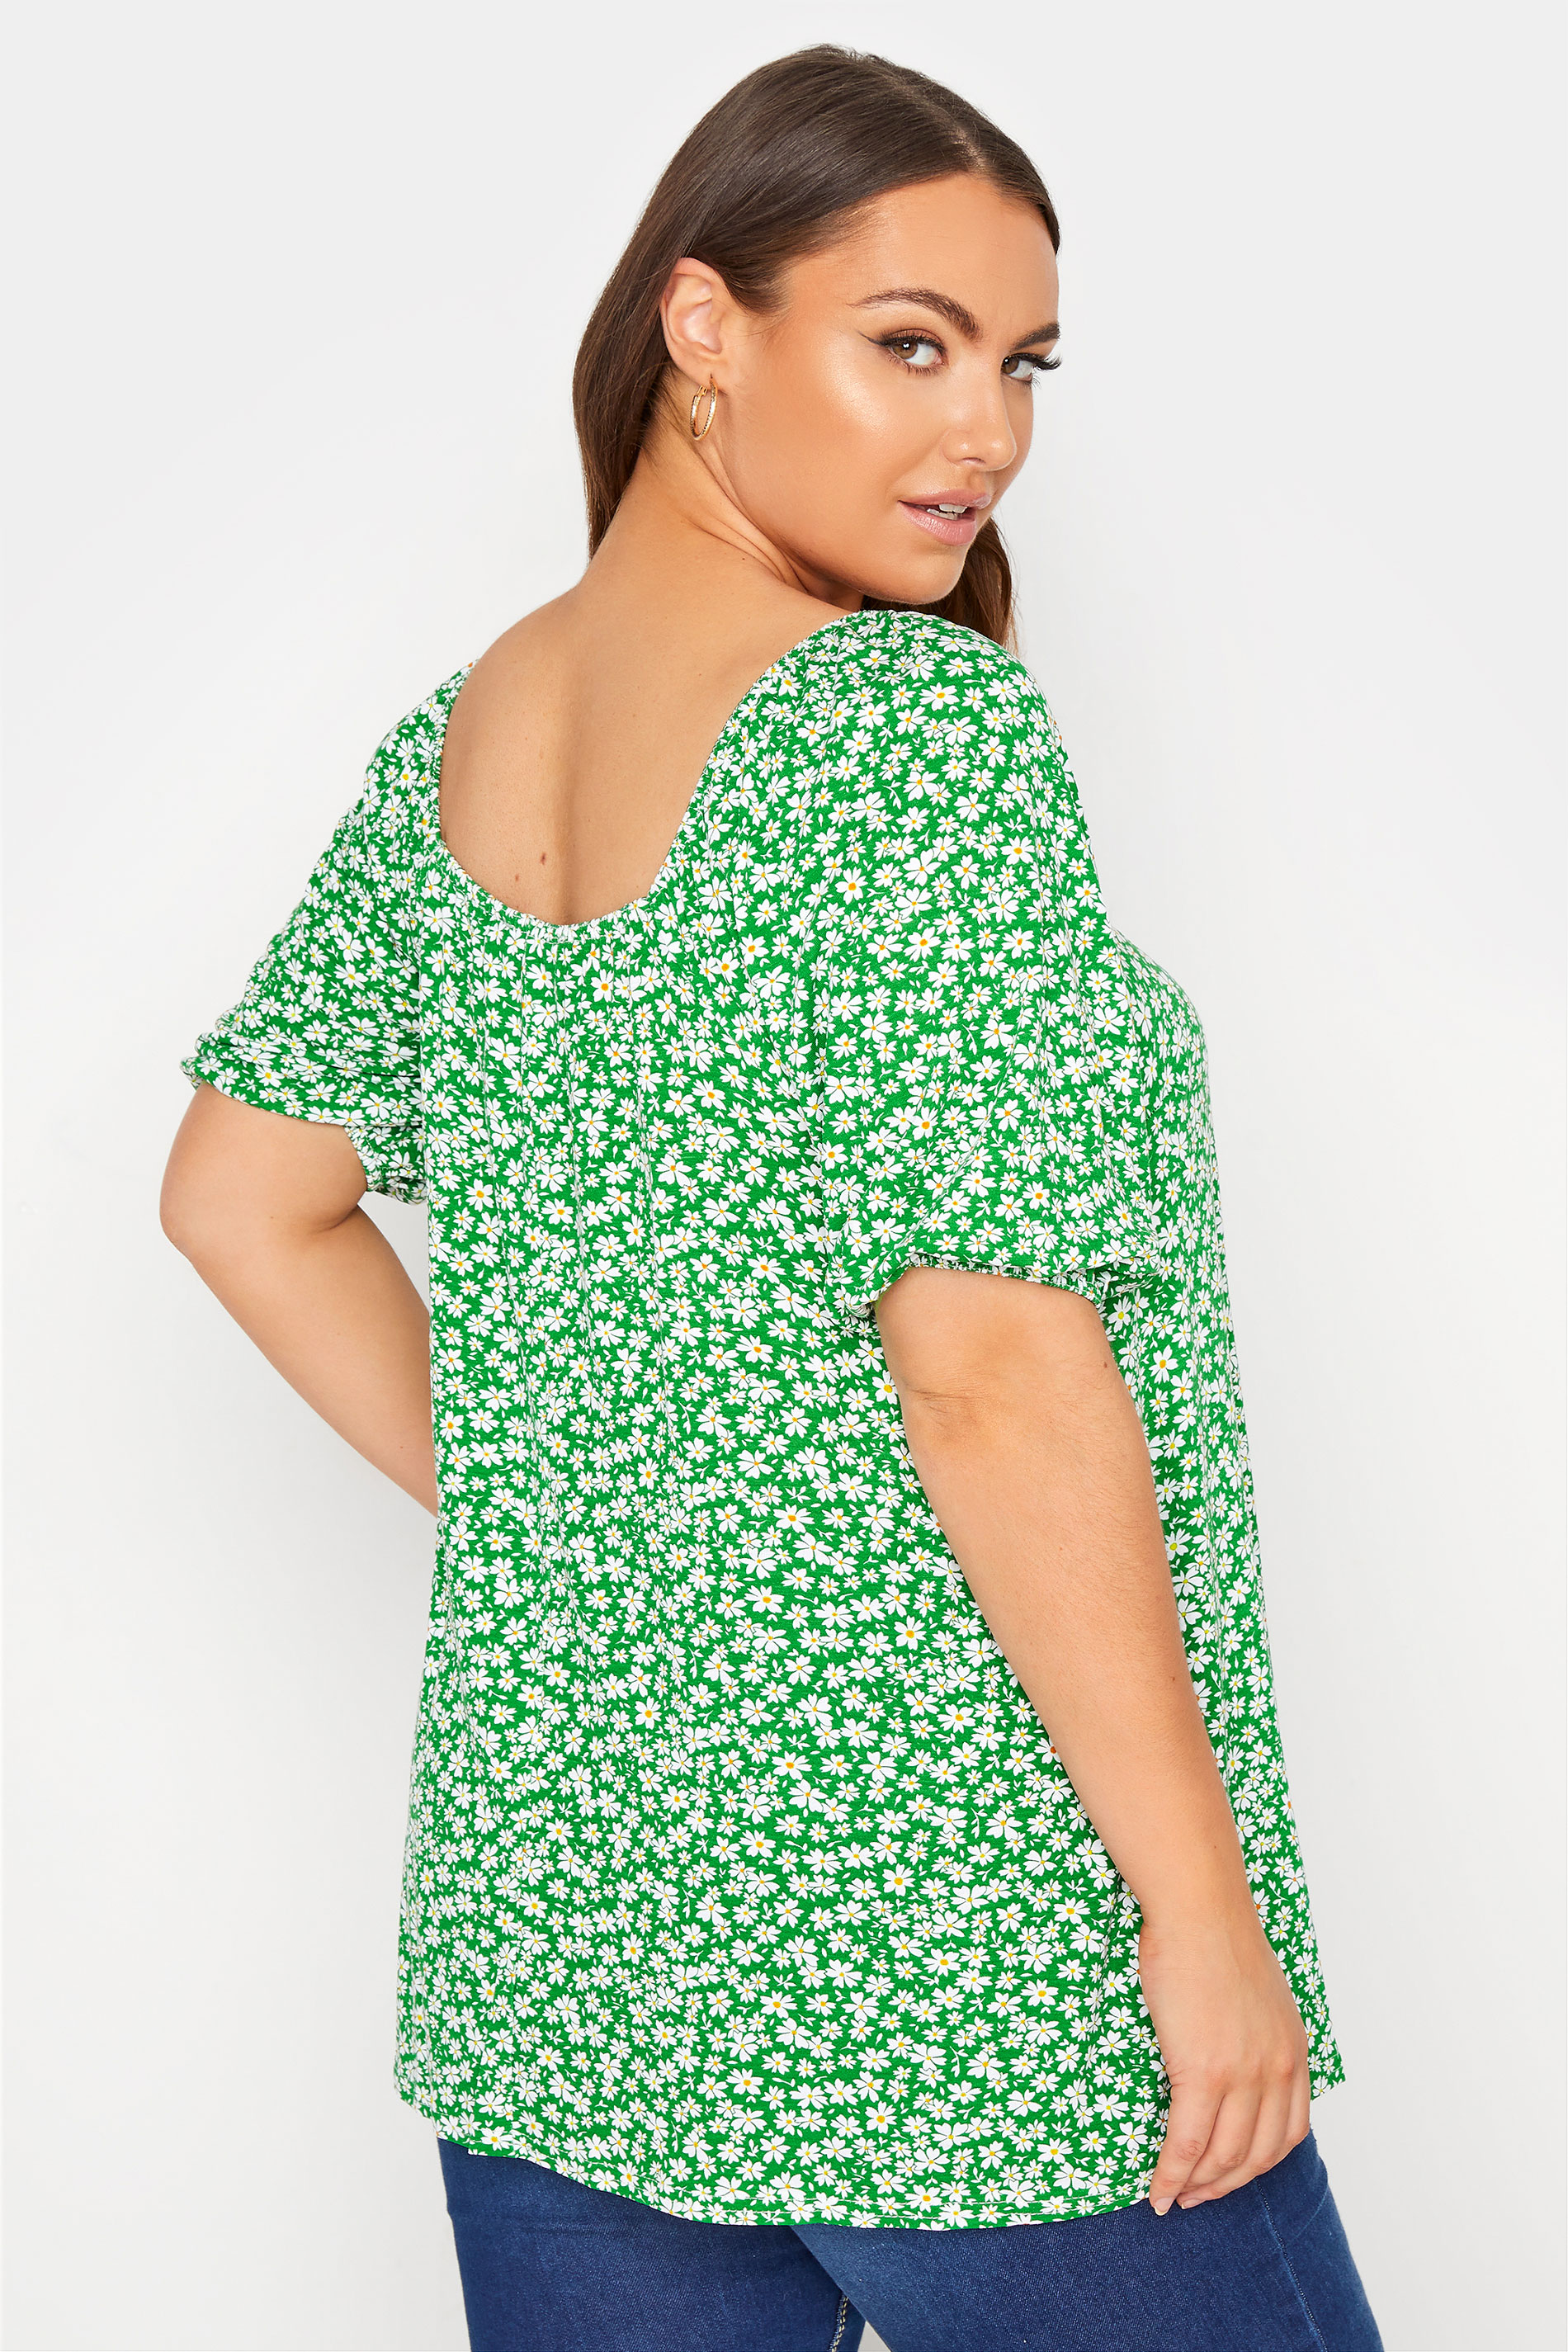 LIMITED COLLECTION Bright Green Daisy Print Square Neck Top | Yours Clothing 3